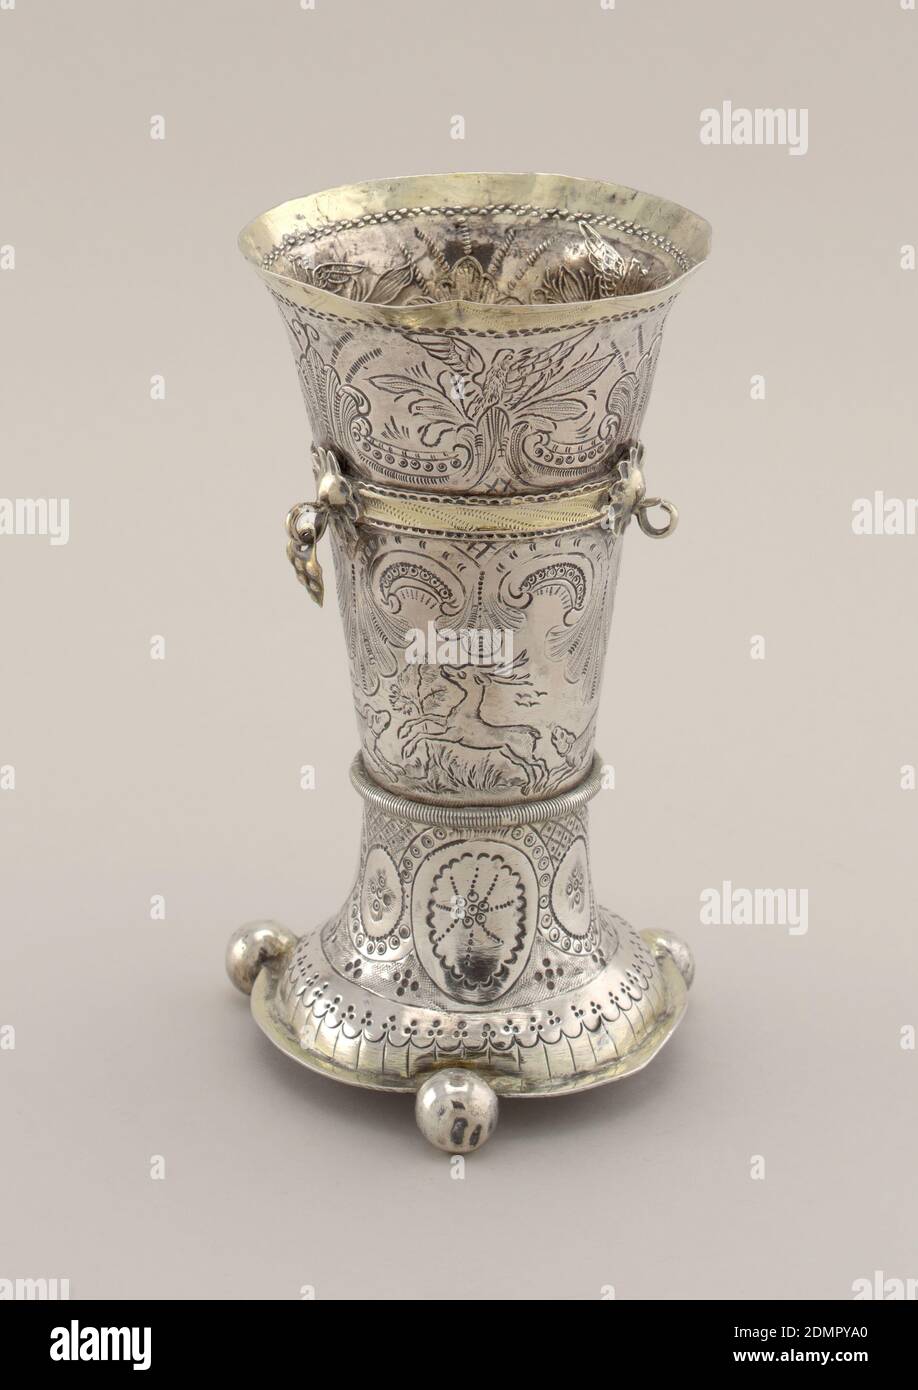 Beaker, Chased and parcel-gilt silver, Spreading domed foot on three balls. Flaring body in three sections with three rings attached to upper band, two of them with lozenge-shaped pendants (third missing). Lower section engraved with oval ornaments; middle section, engraved with hunting scene, the upper with three spread eagles and scrolls. Rim, foot and bands gilt., Bergen, Norway, 1767, metalwork, Decorative Arts, Beaker Stock Photo